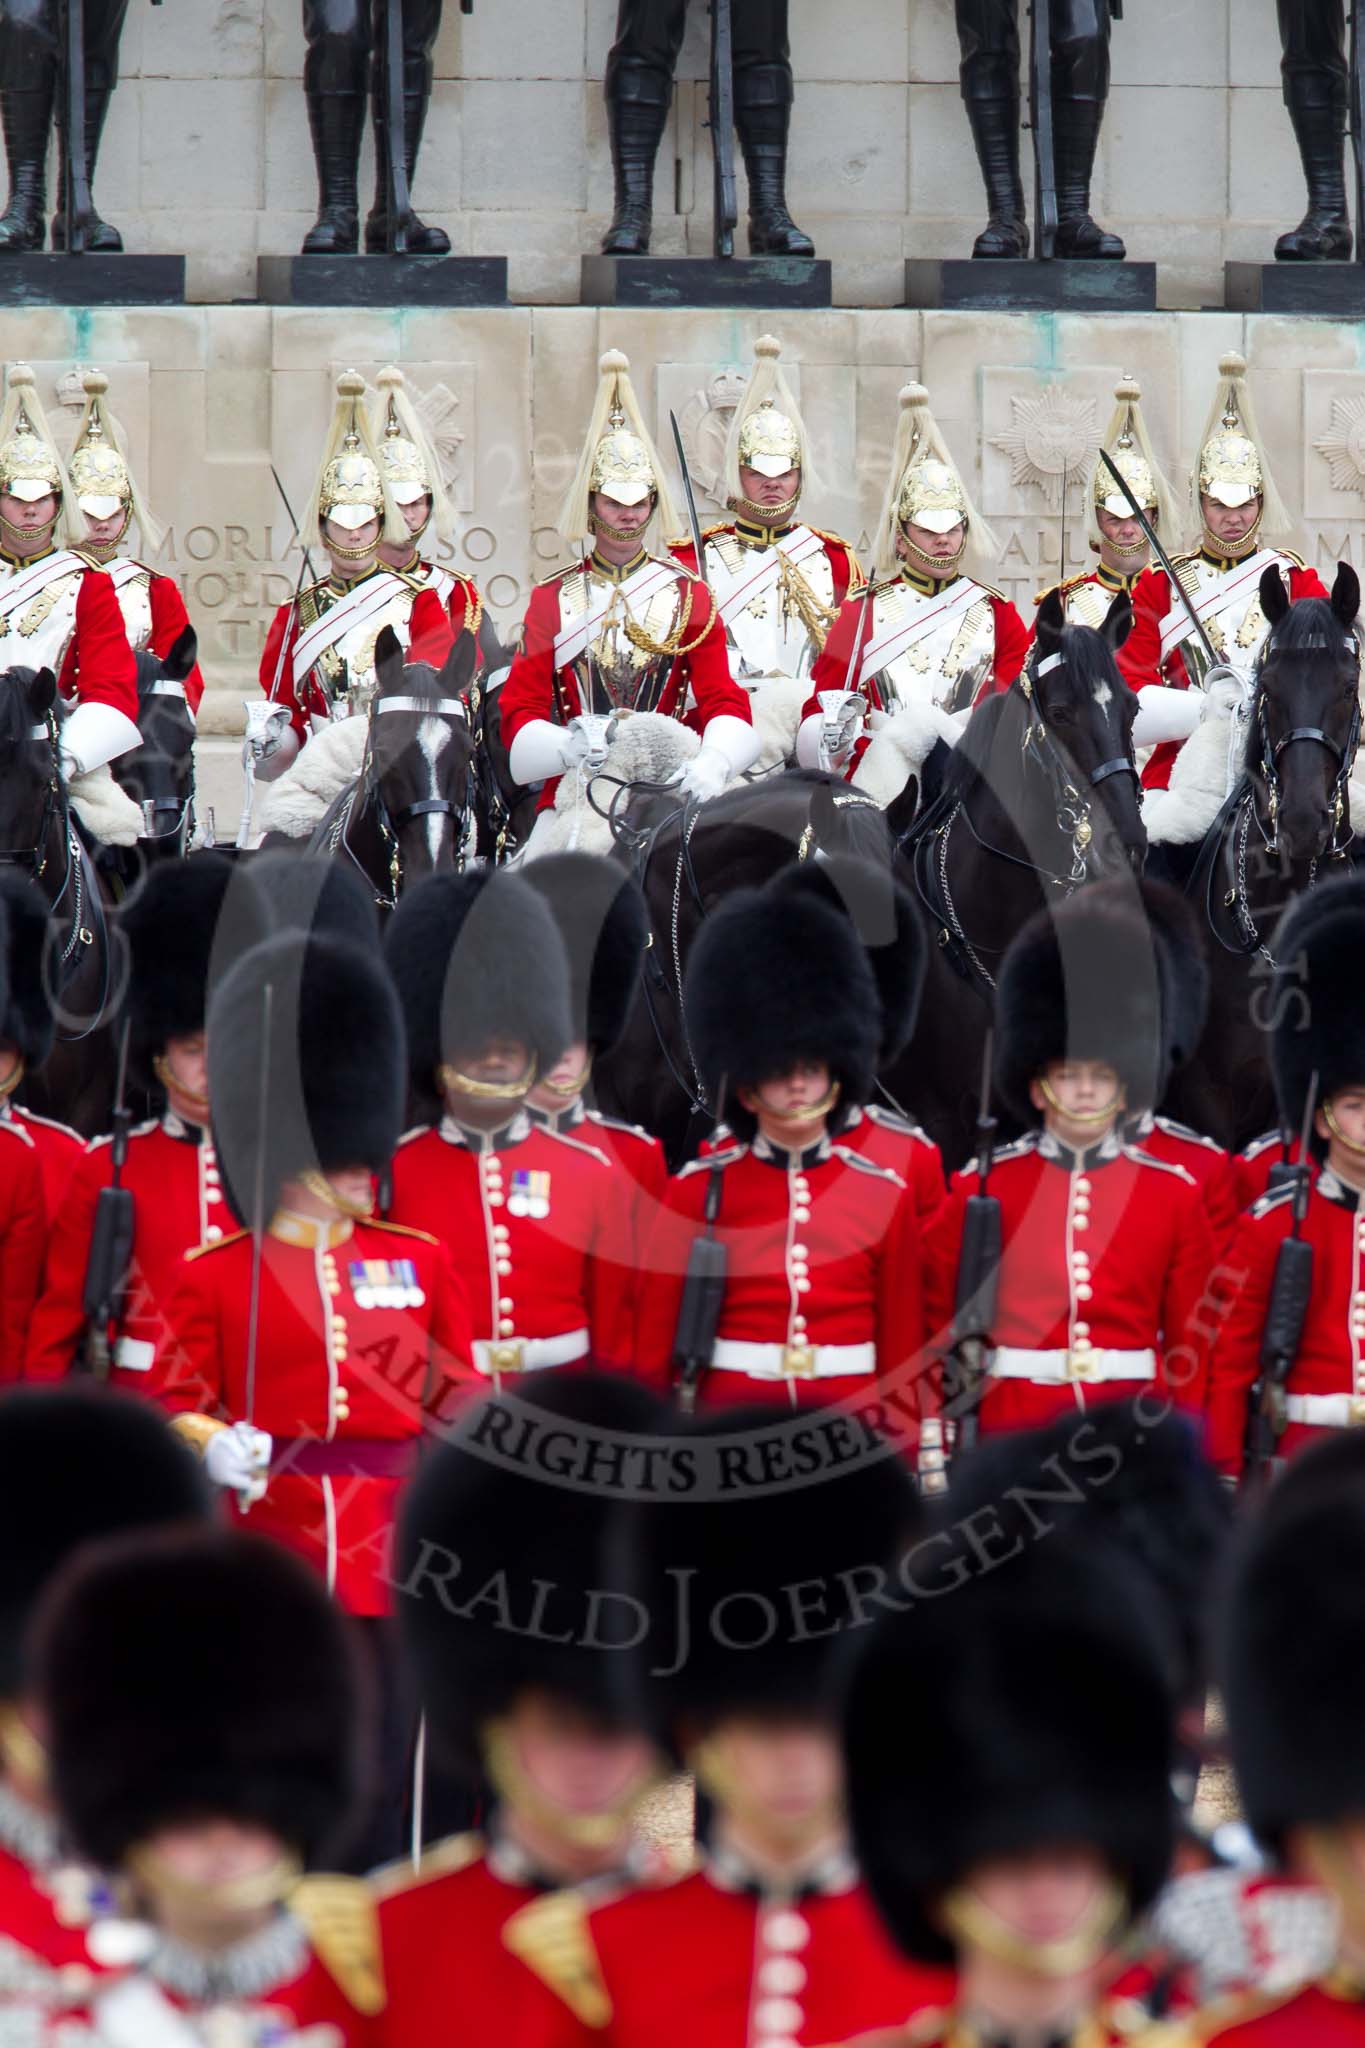 The Major General's Review 2011: No. 3 Guard, F Company Scots Guards. Behind them, The Life Guards of the Household Cavalry in front of the Guards Memorial..
Horse Guards Parade, Westminster,
London SW1,
Greater London,
United Kingdom,
on 28 May 2011 at 11:51, image #233